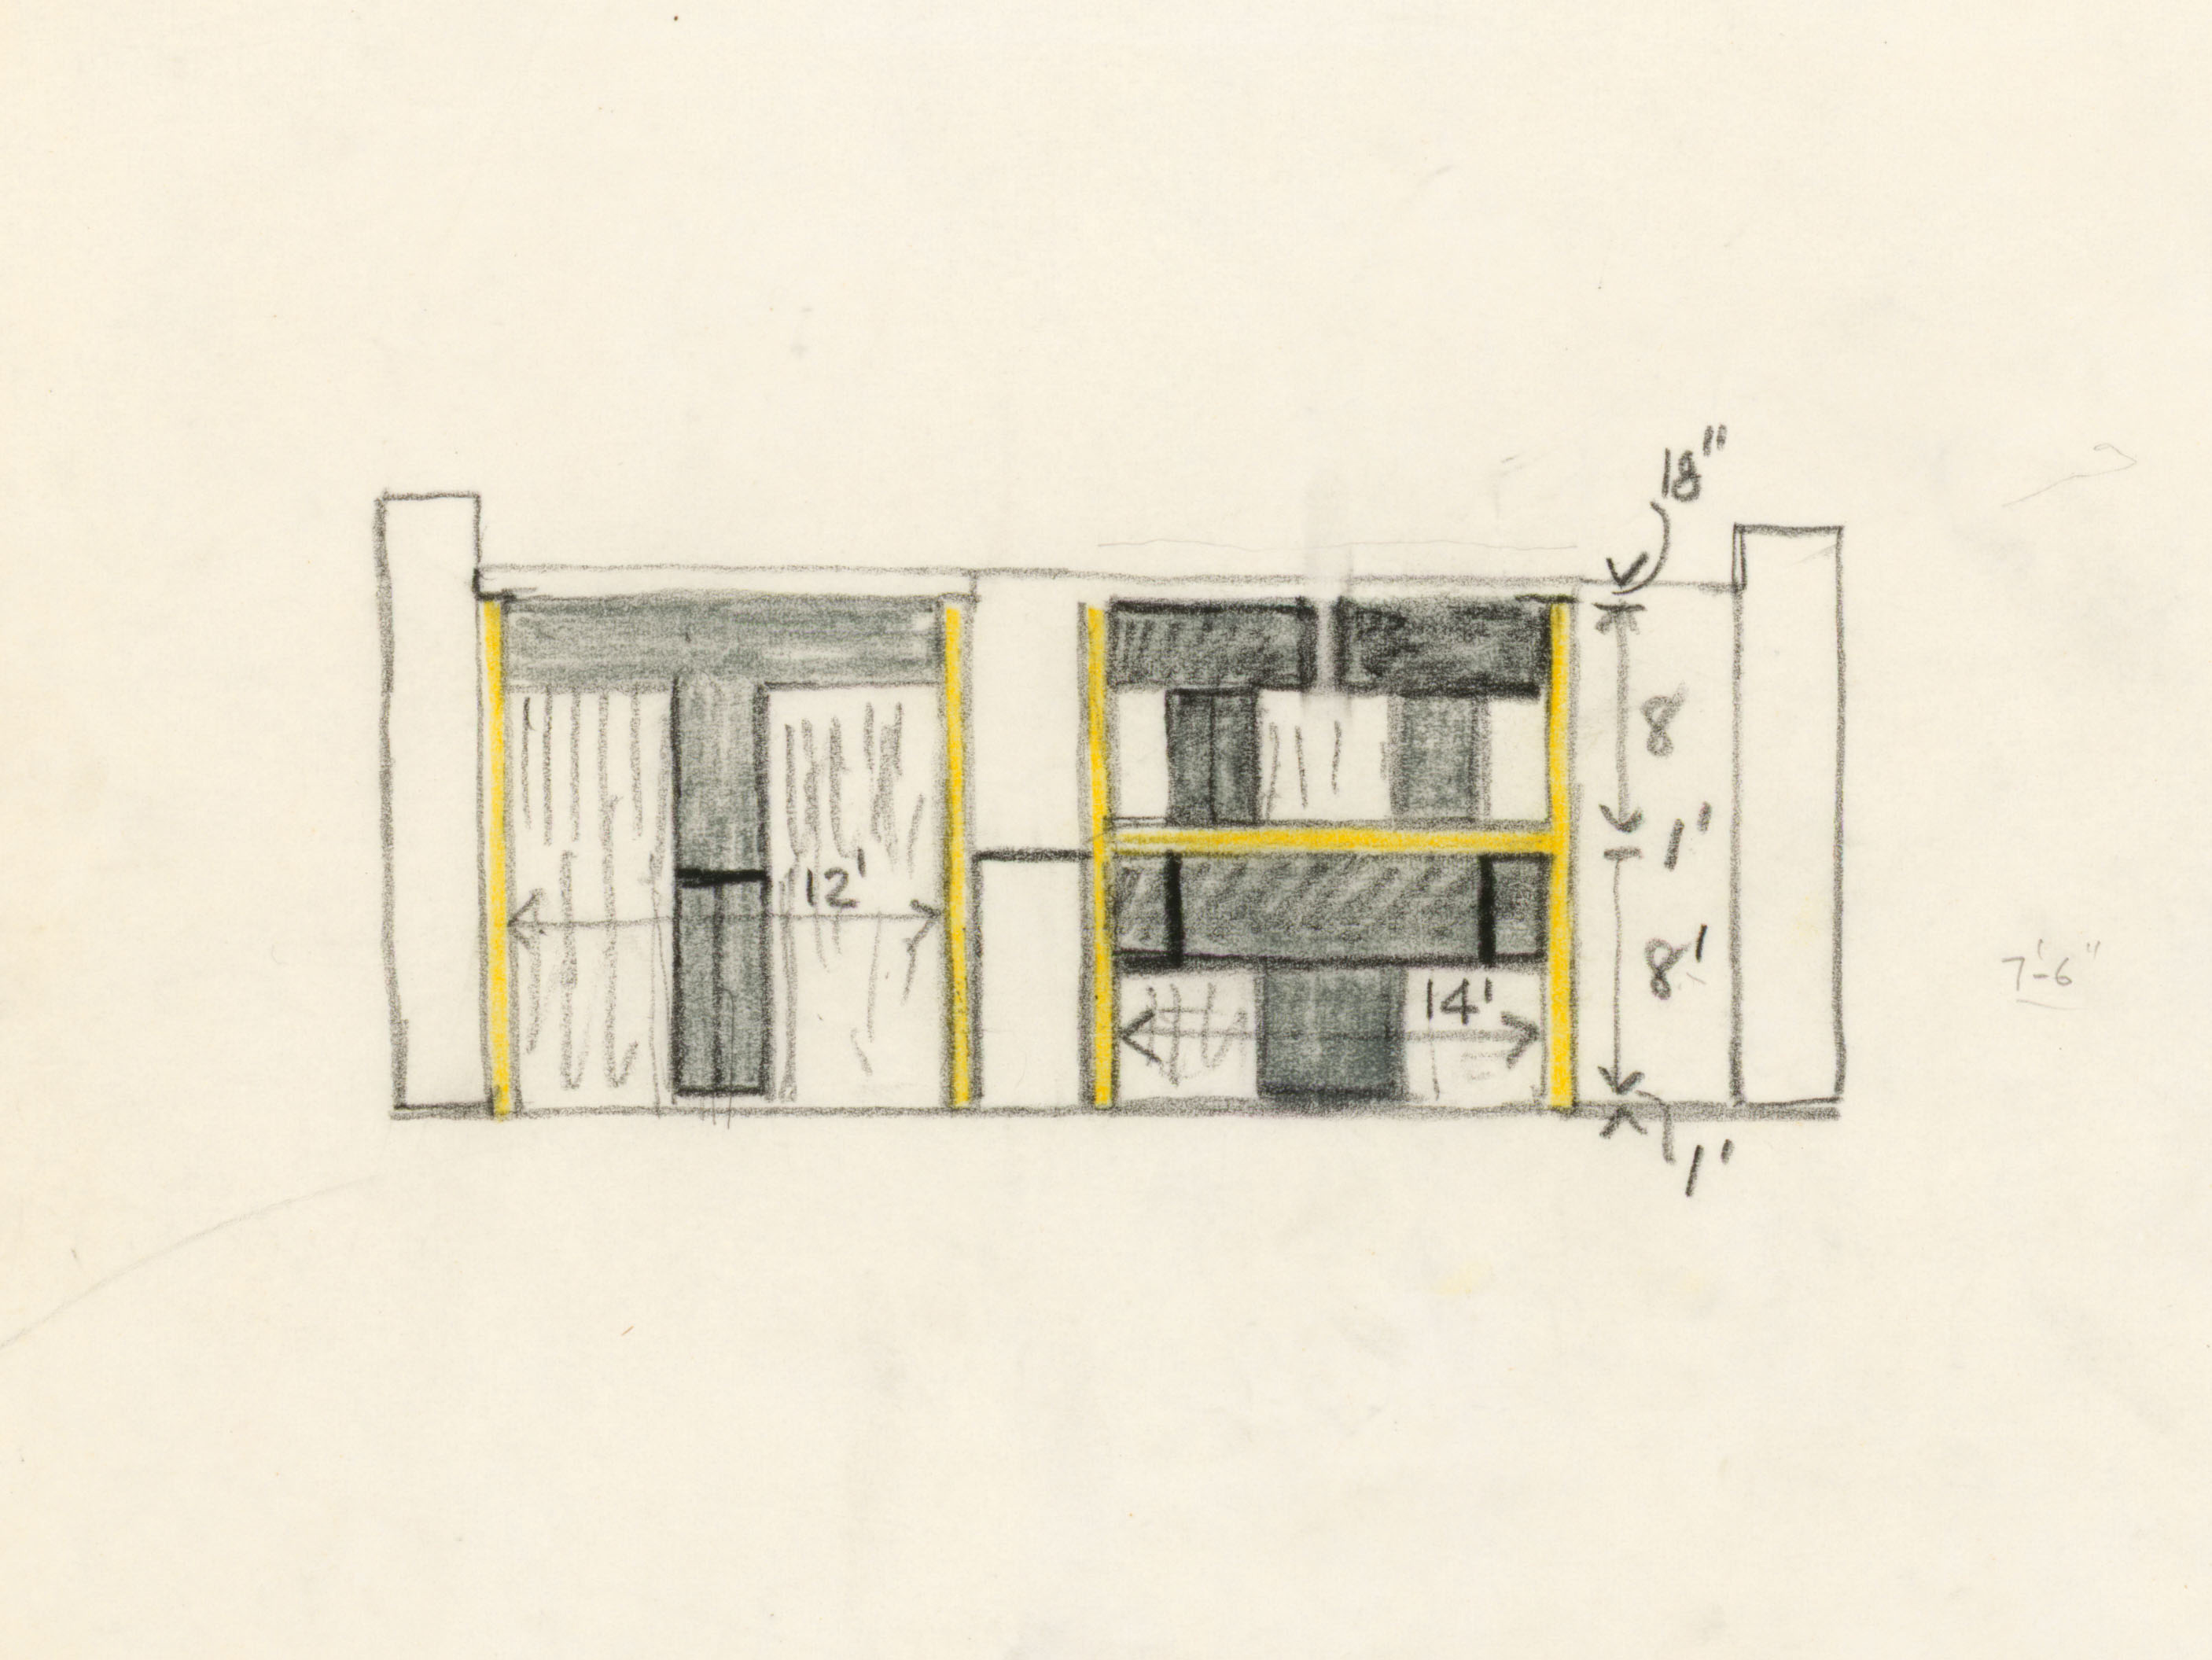 Kahn's Sketch of the Esherick House in Chestnut Hill. Louis I. Kahn Collection, University of Pennsylvania and the Pennsylvania Historical and Museum Commission.​